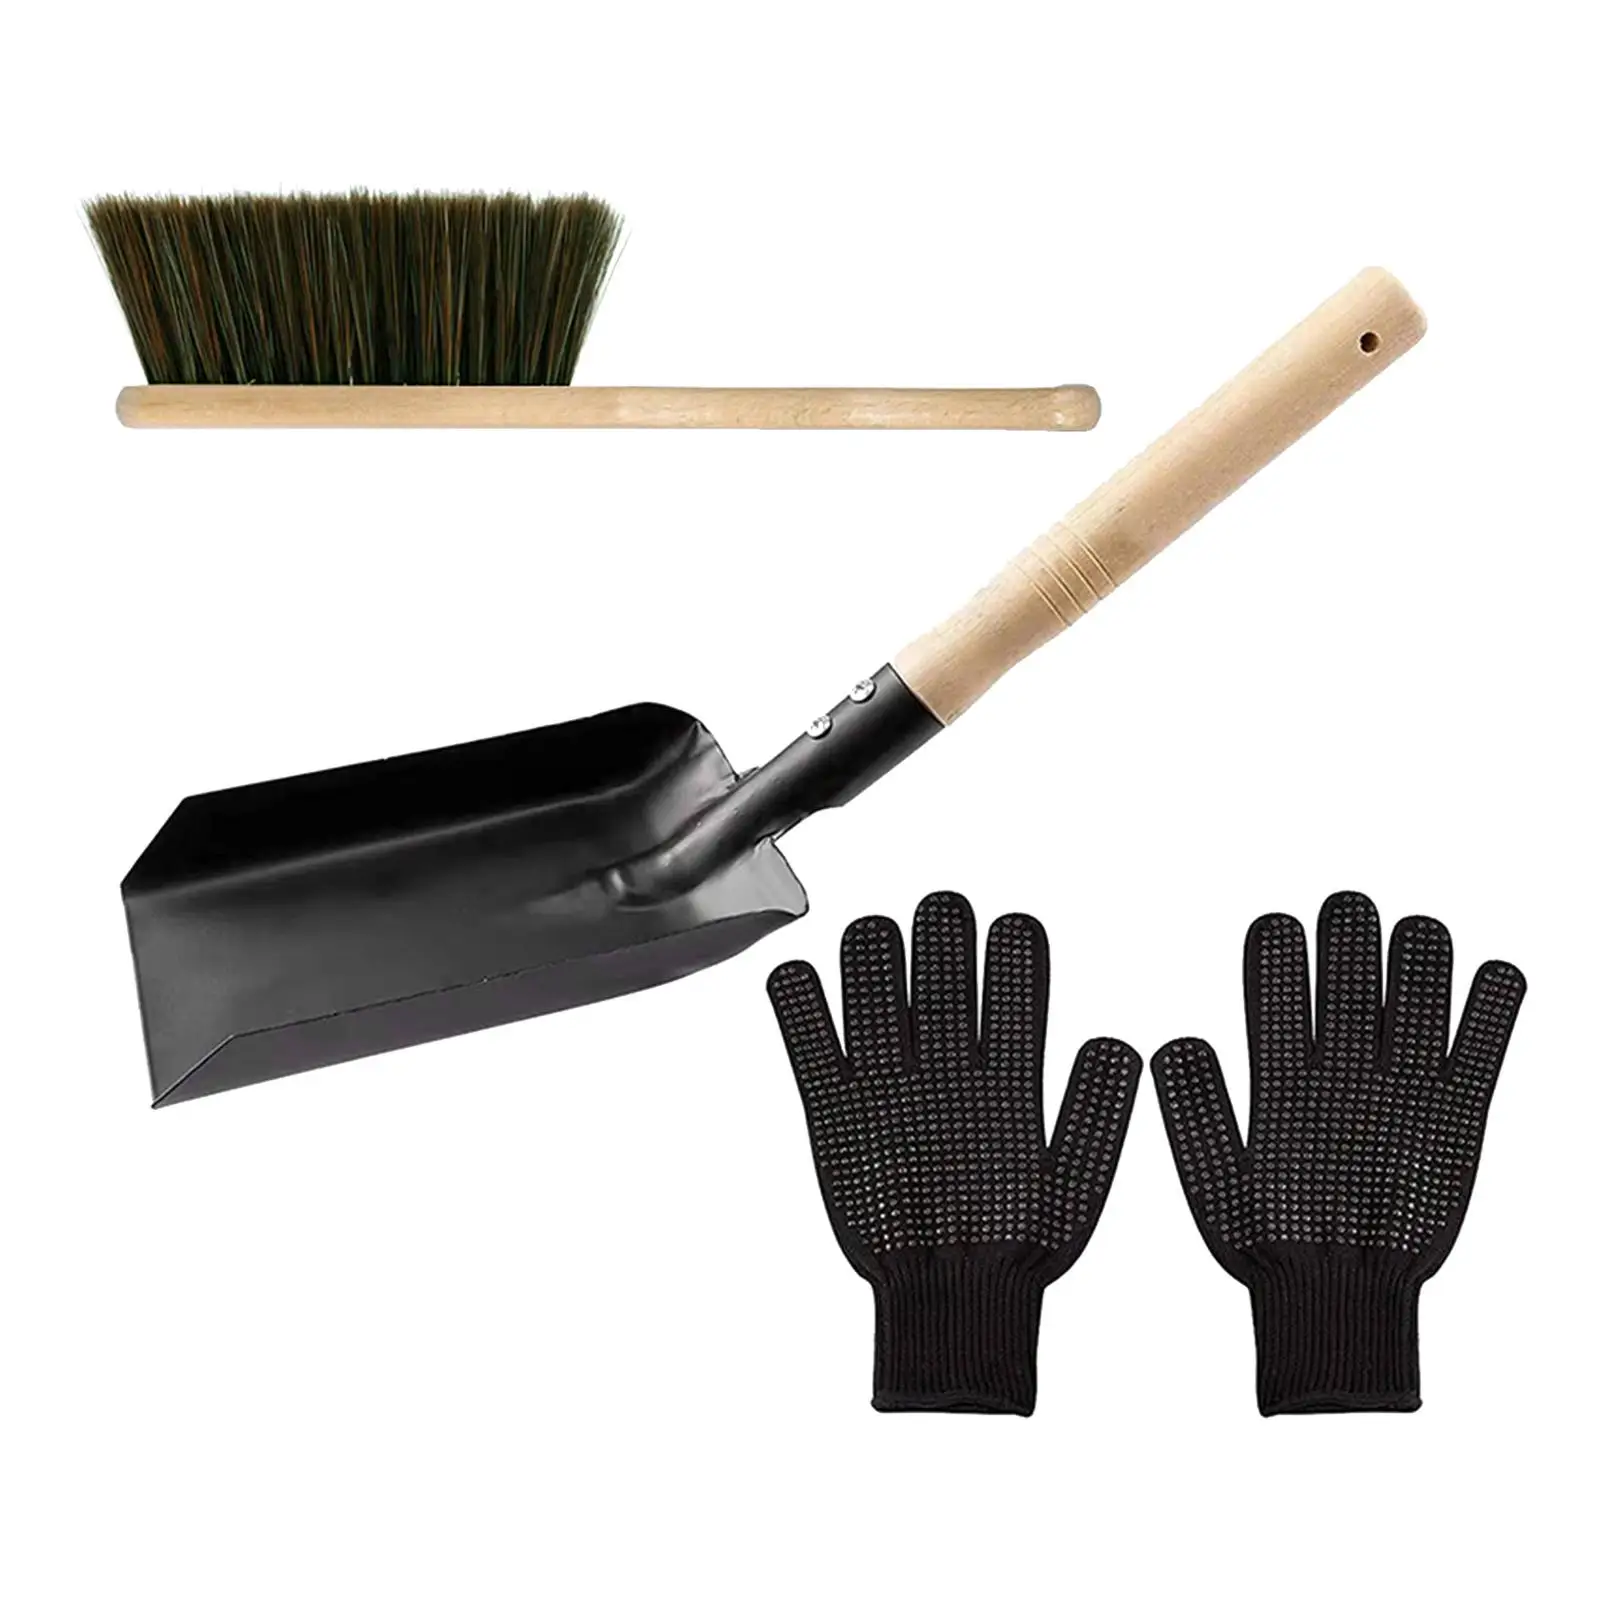 Fire Place Tool Set Shovel and Hearth Brush Set Hearth Tidy Ash Fireside Black Gloves Accessories for Dust Cleaning Indoor